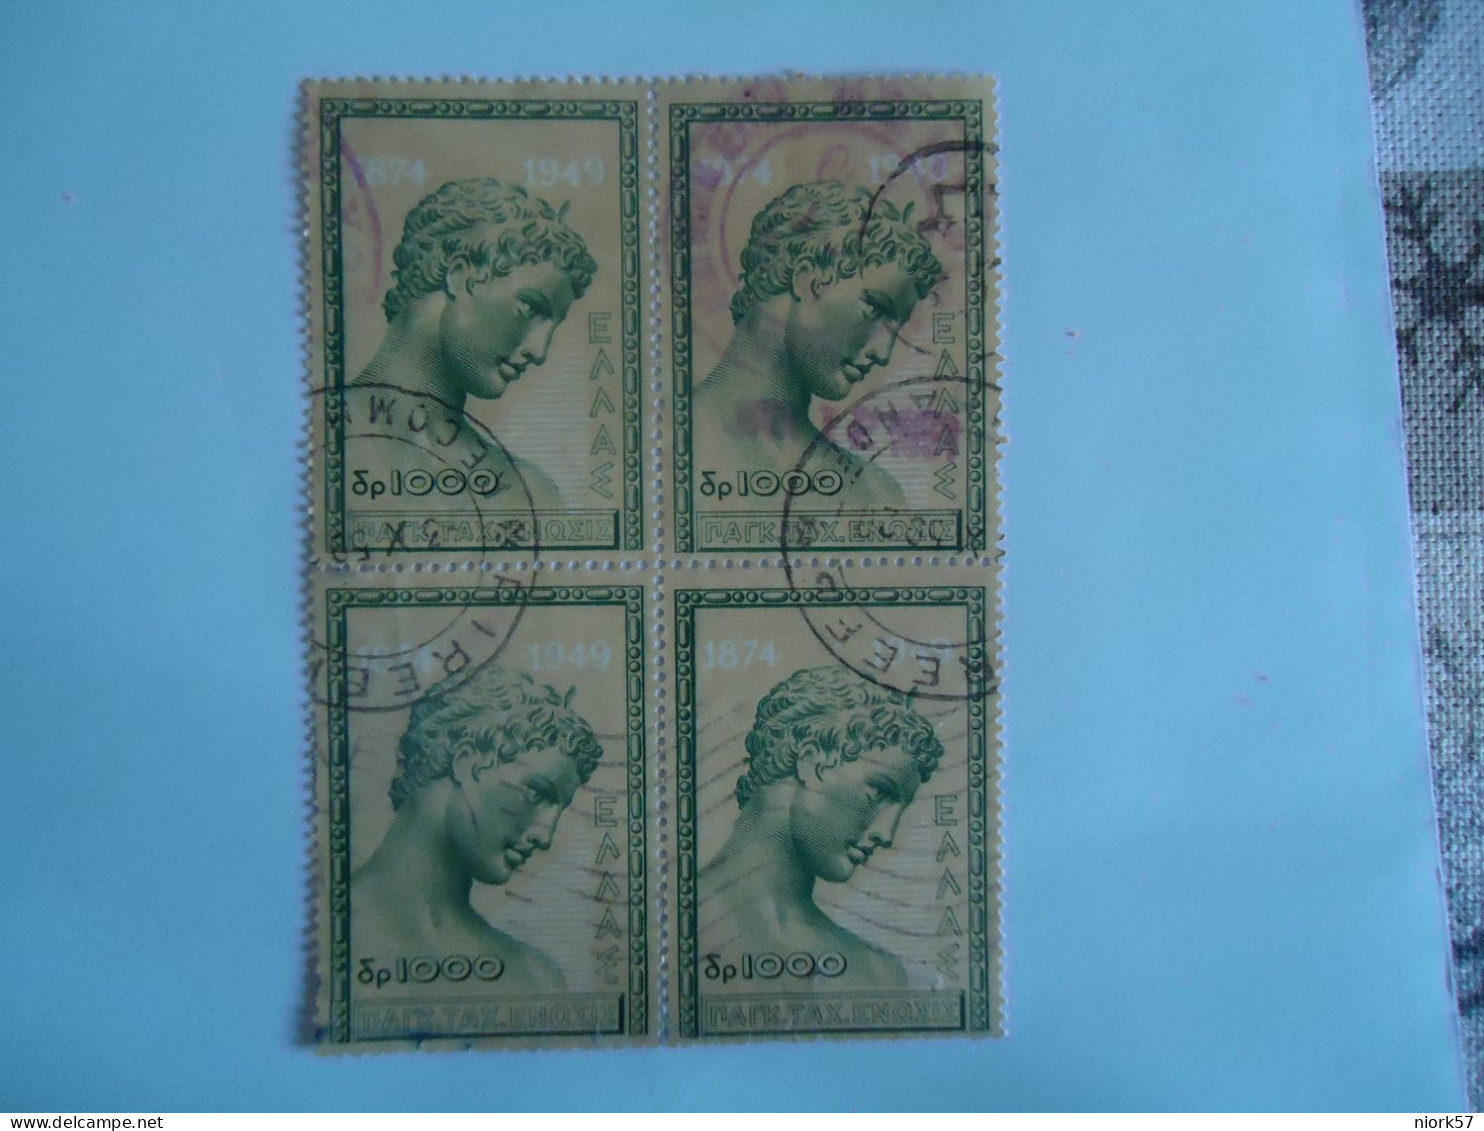 GREECE USED STAMPS 1950  STAMPS  DAY BLOCK OF 4 POSTMARK  ΠΕΙΡΑΙΕΥΣ ECONOMY RED - Oblitérés